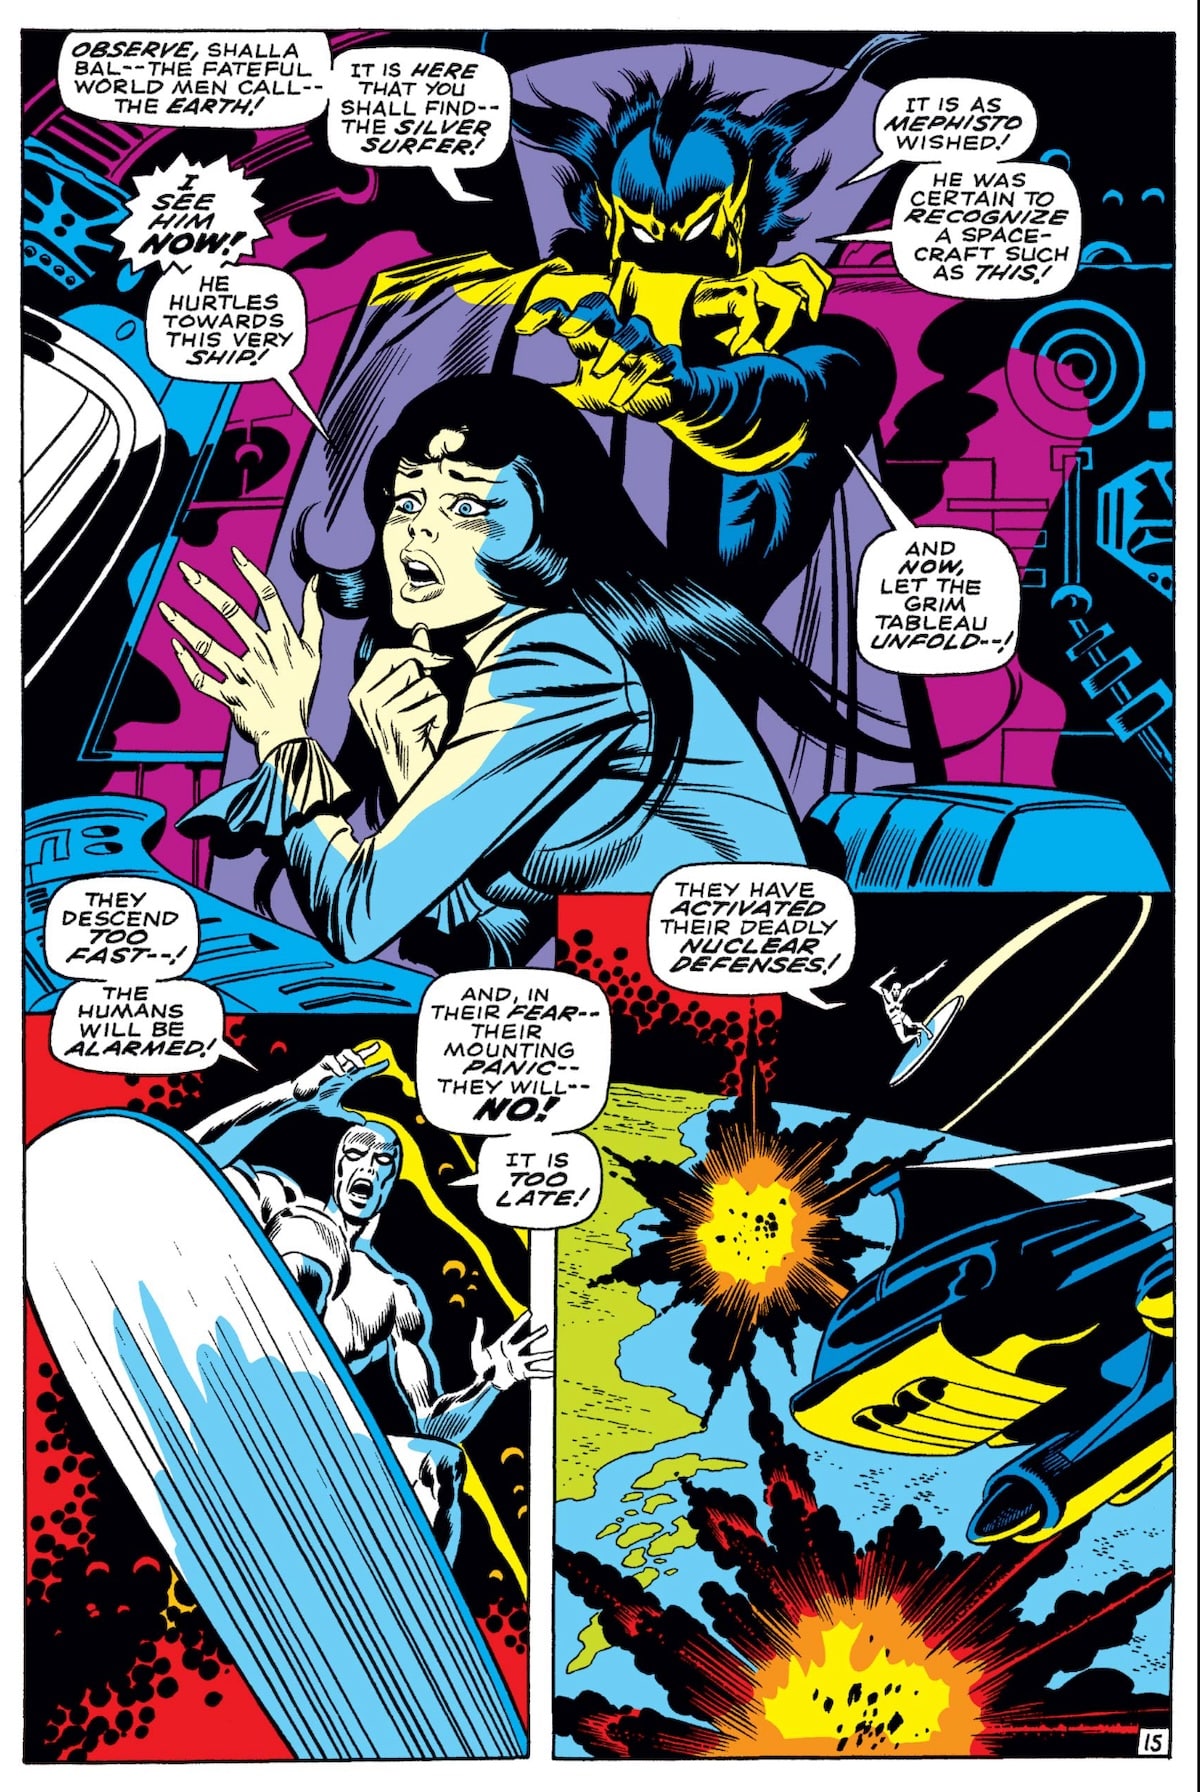 Shalla-Bal and Mephisto are under attack in a space ship. Silver Surfer tries to stop the attack.